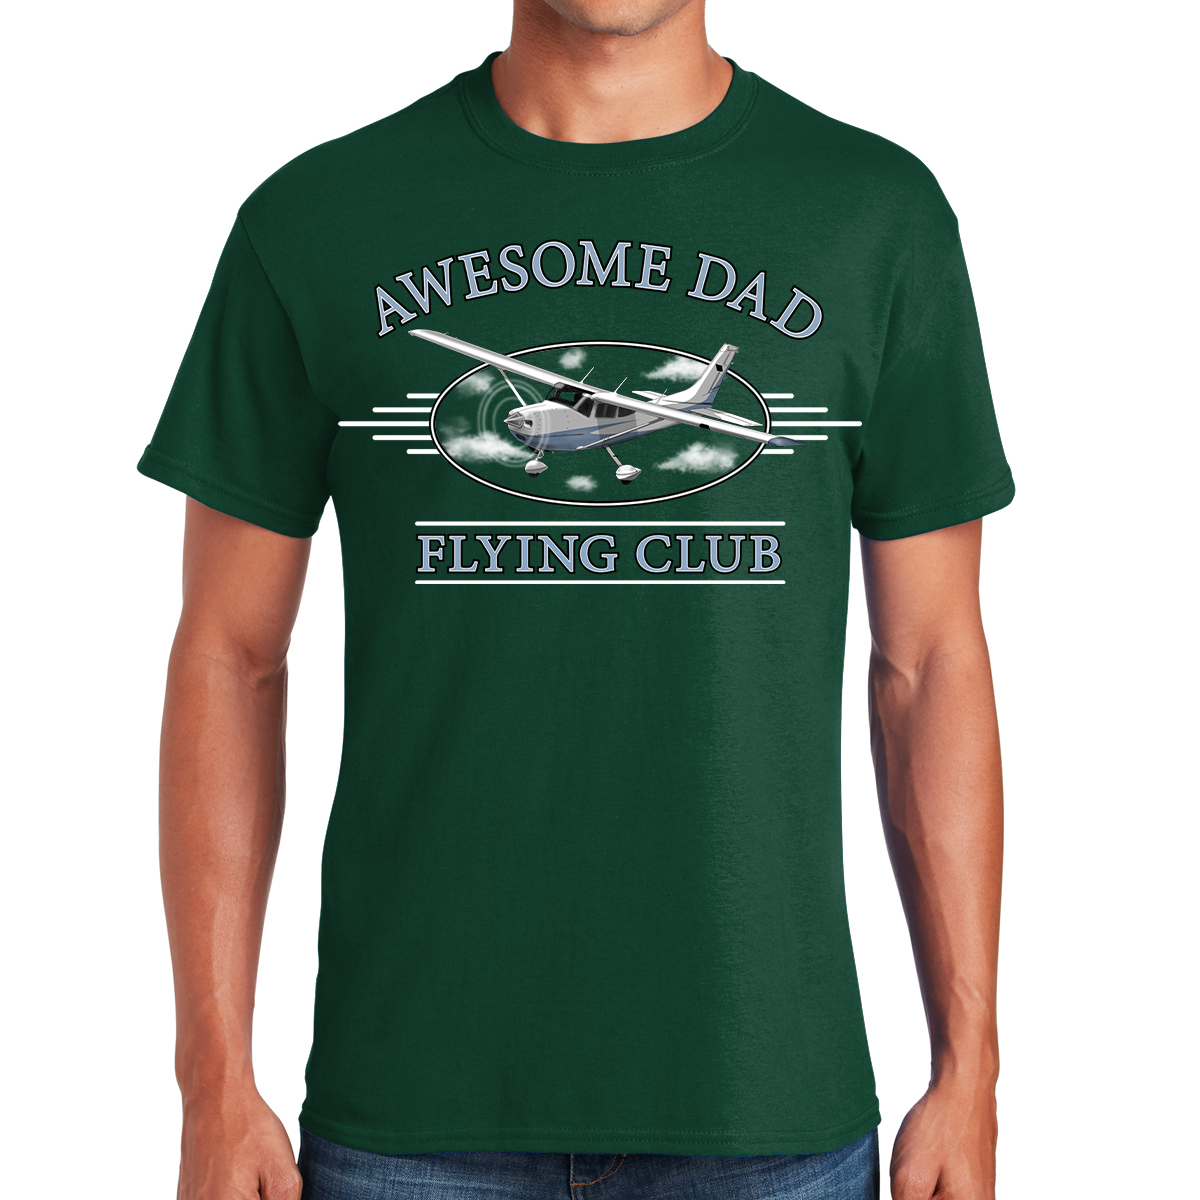 Awesome Dad Flying Club Soaring To New Heights In Fatherhood Gift For Dads T-shirt